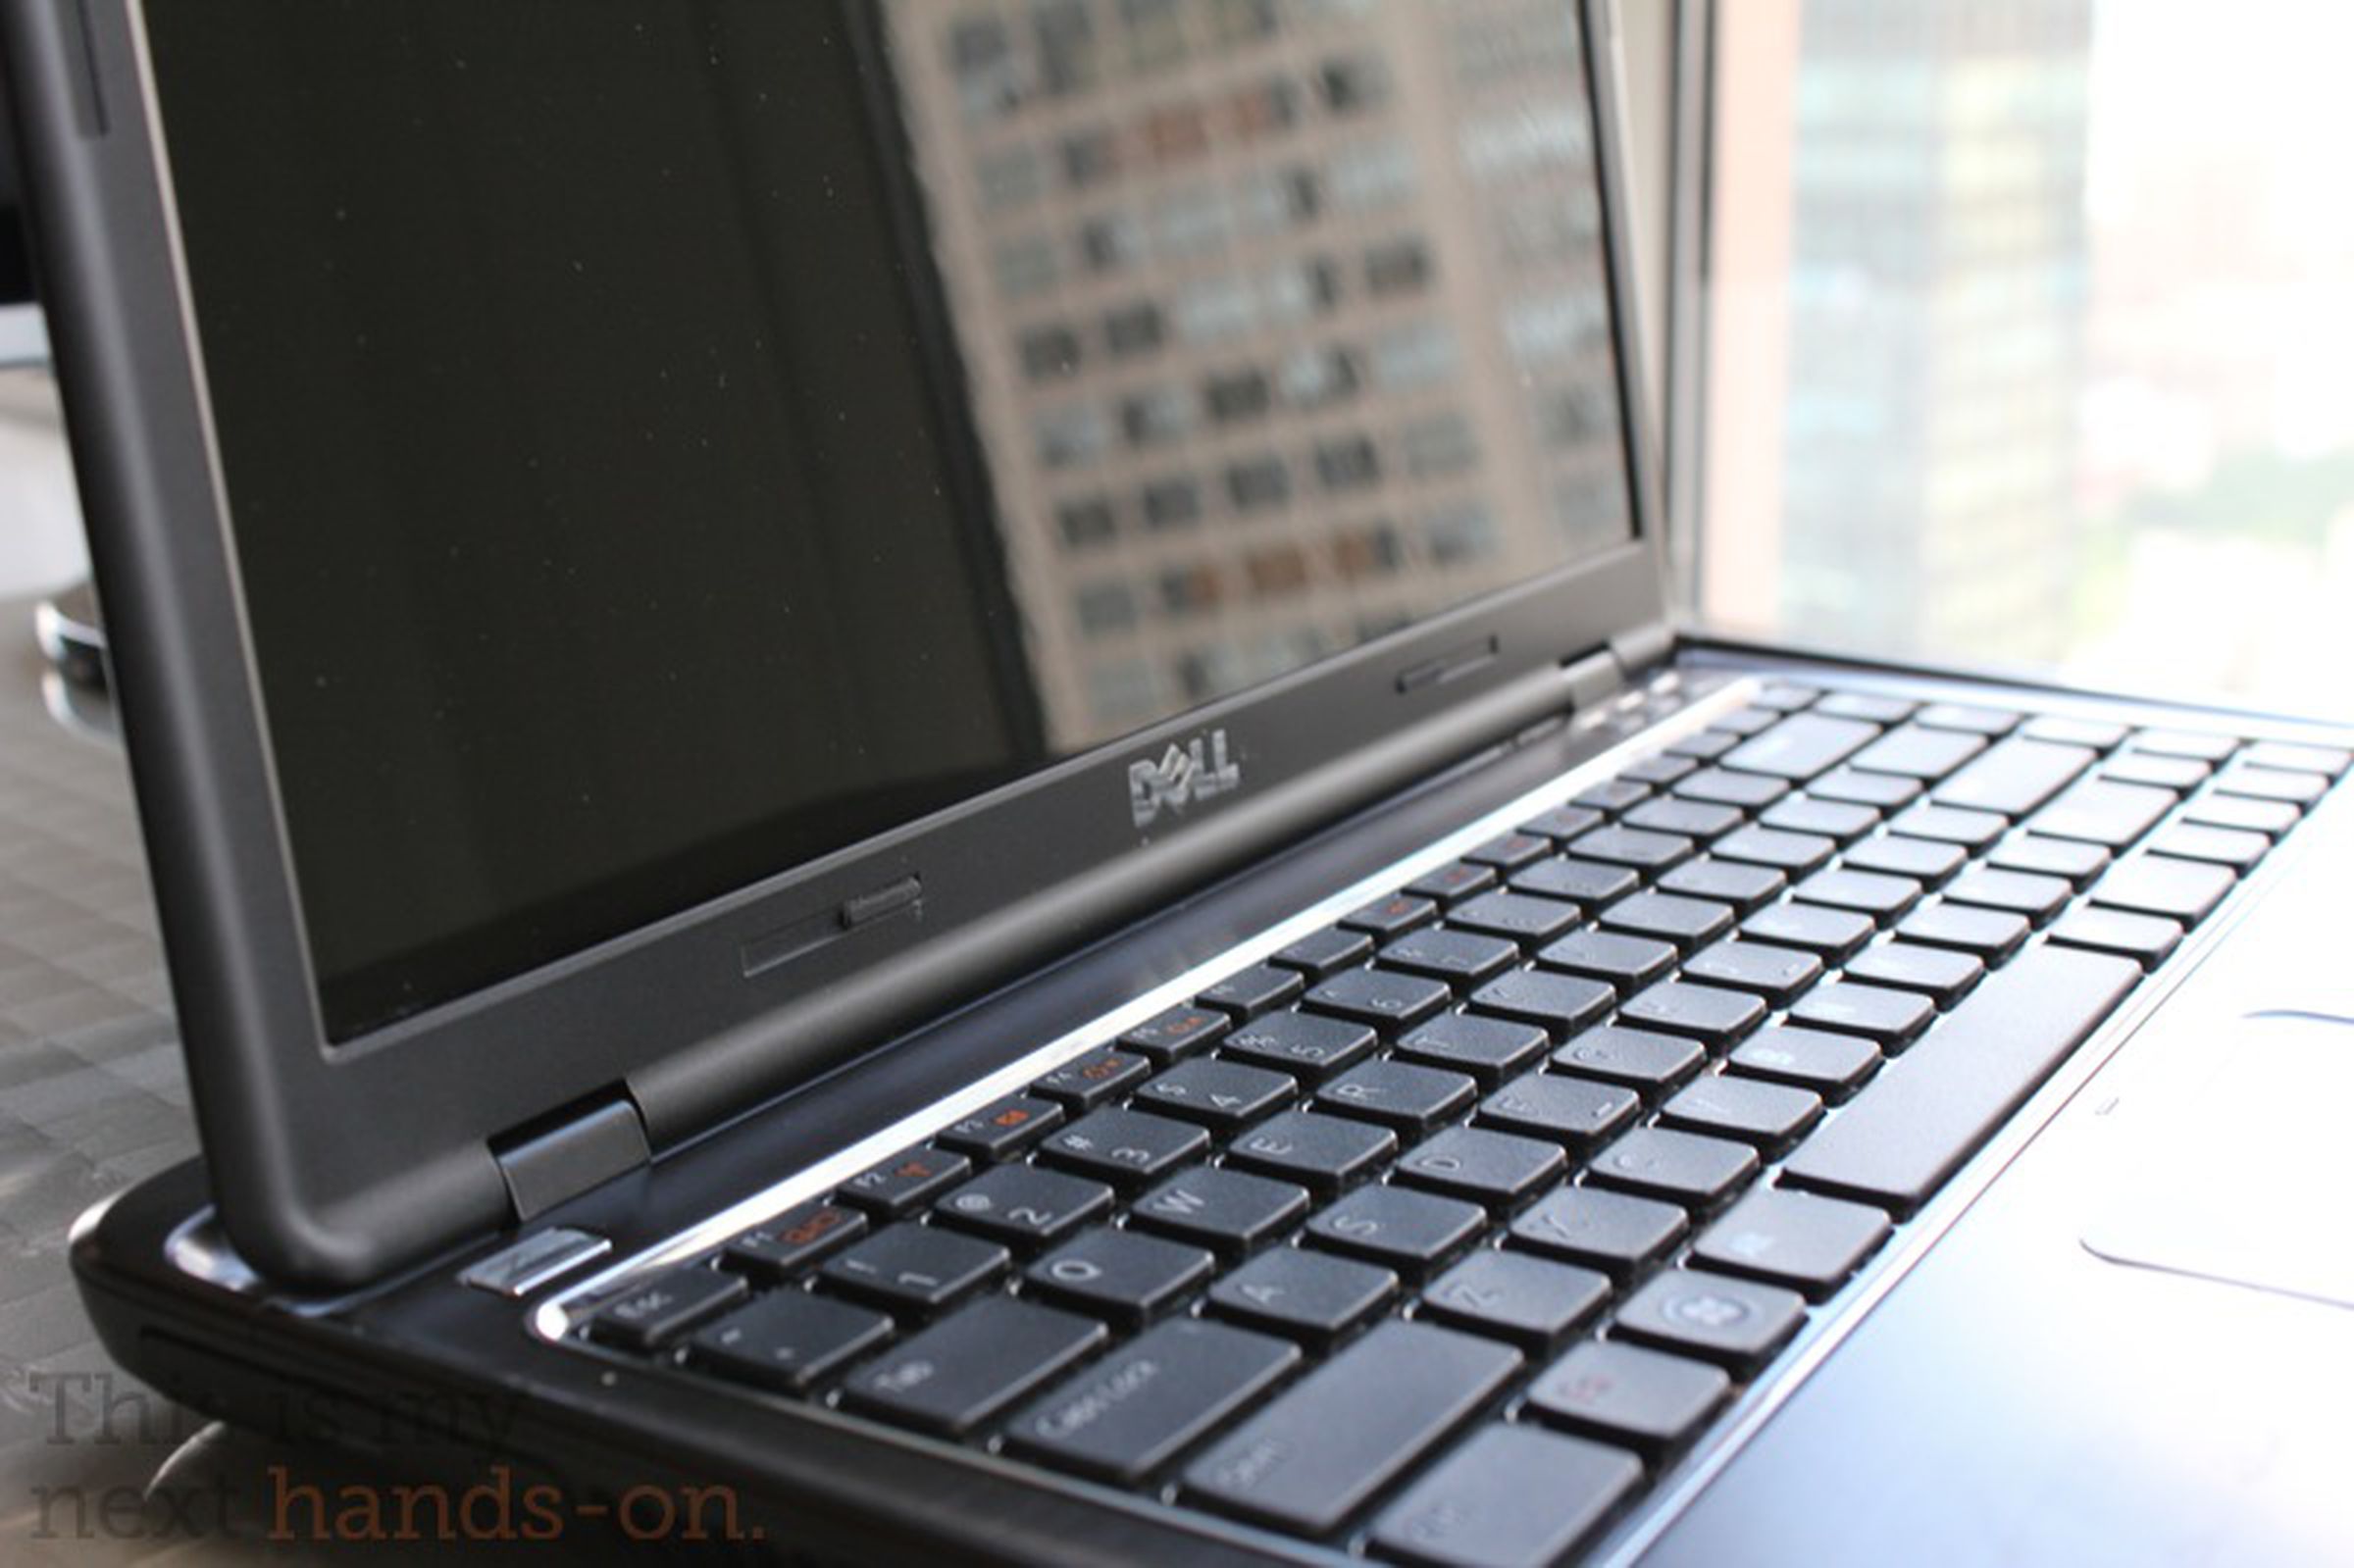 Dell Inspiron 13z and 14z start at $600; a step in the right direction for budget laptops